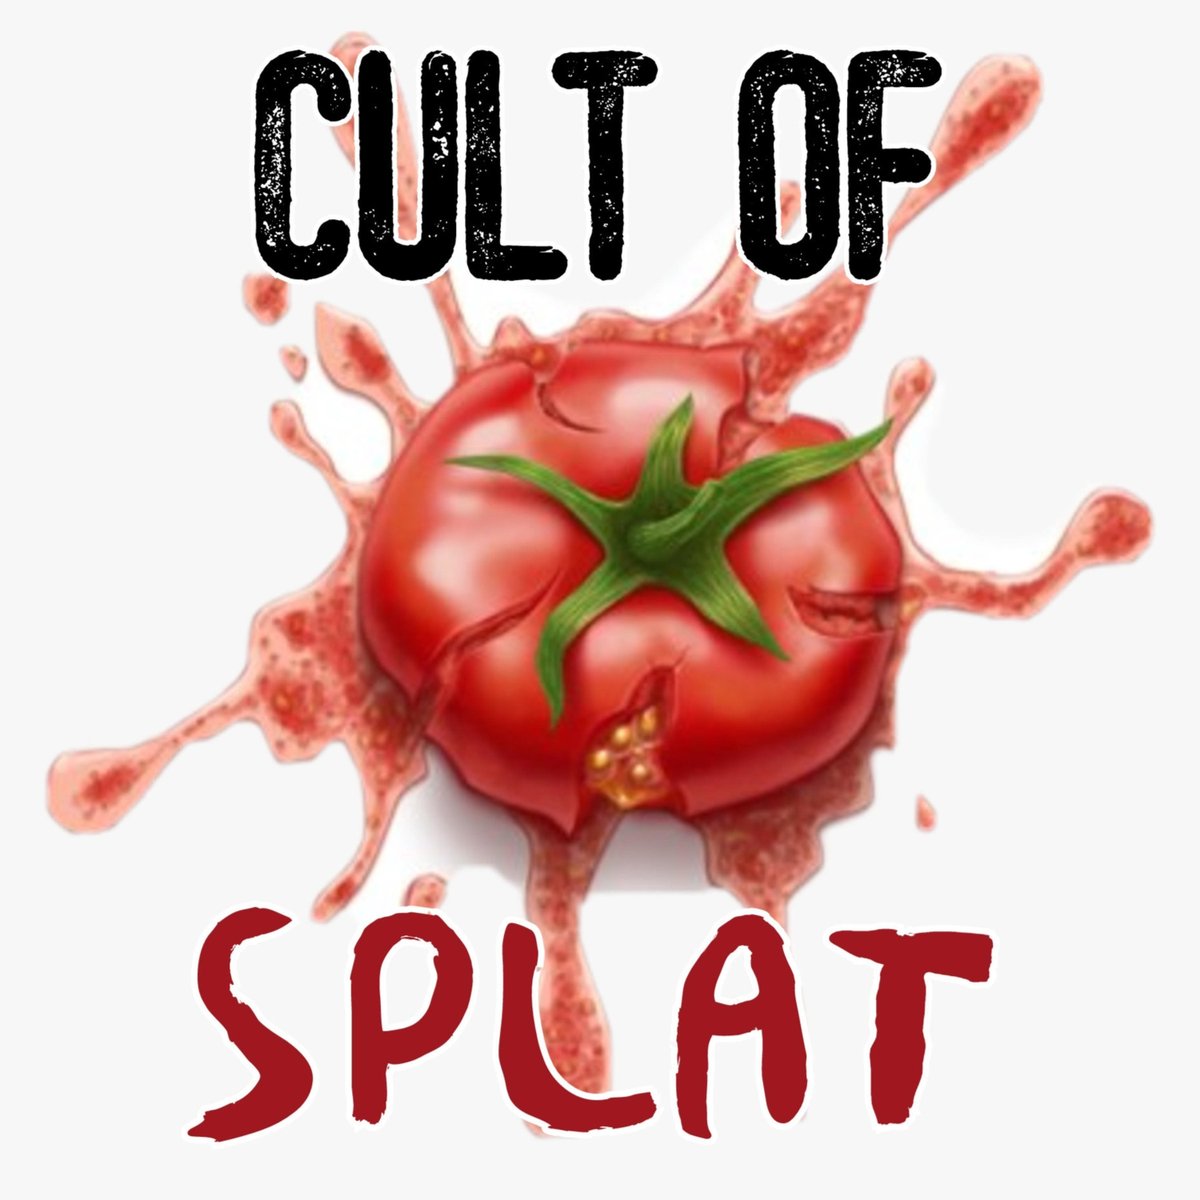 Give a listen to Cult of Splat @cultofsplat We take a look at a movie that Rotten Tomatoes has labeled as 'rotten' but that they (at least one of them, anyway) absolutely love. @pcast_ol @tpc_ol @pds_ol @wh2pod @ncore_ol More great Film podcasts: smpl.is/91wro